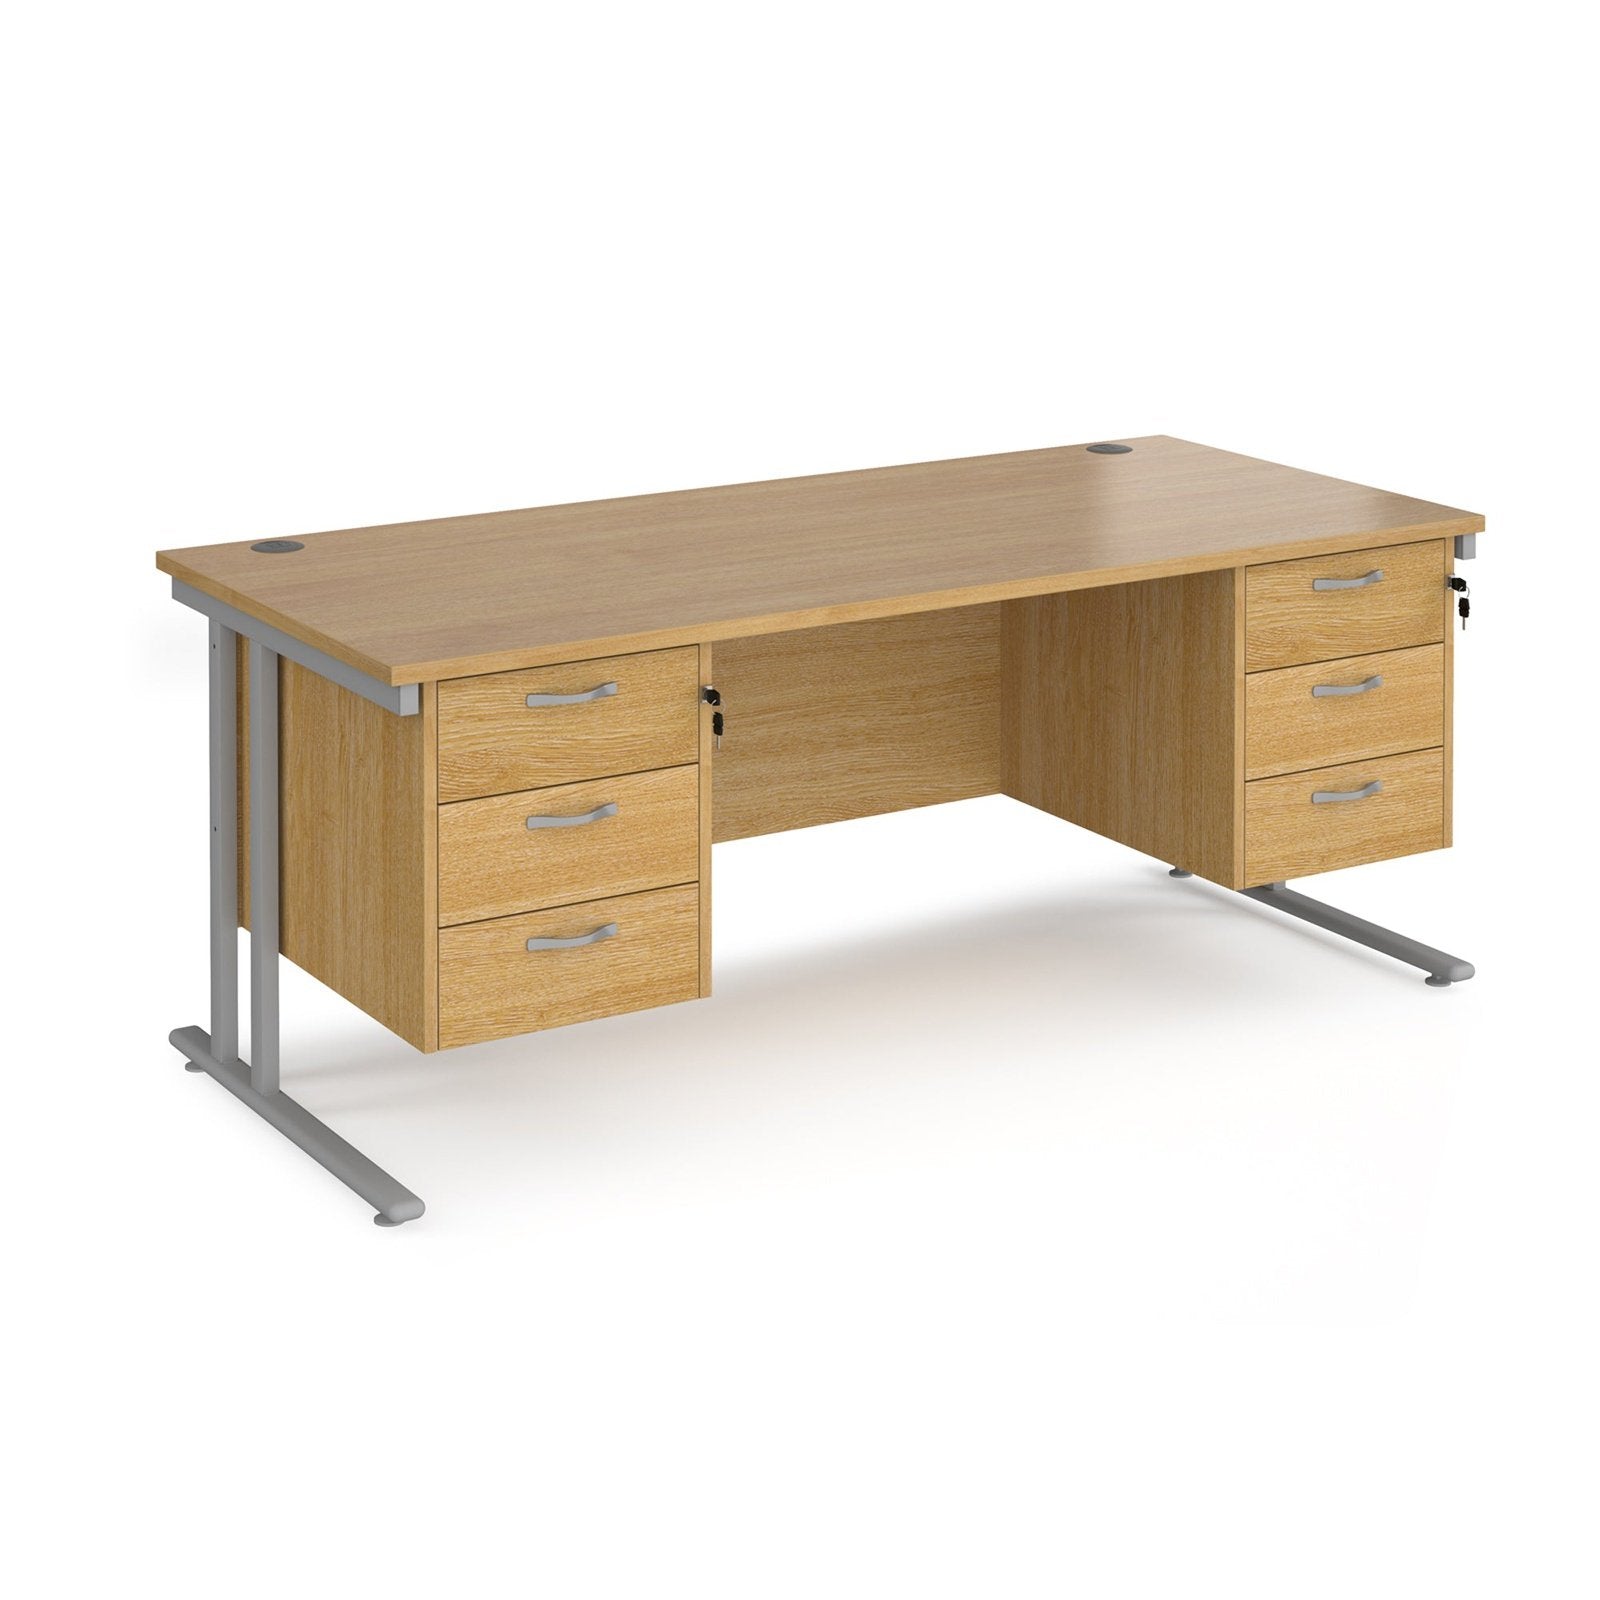 Maestro 25 cantileer leg straight desk 800 deep with two x 3 drawer pedestals - Office Products Online